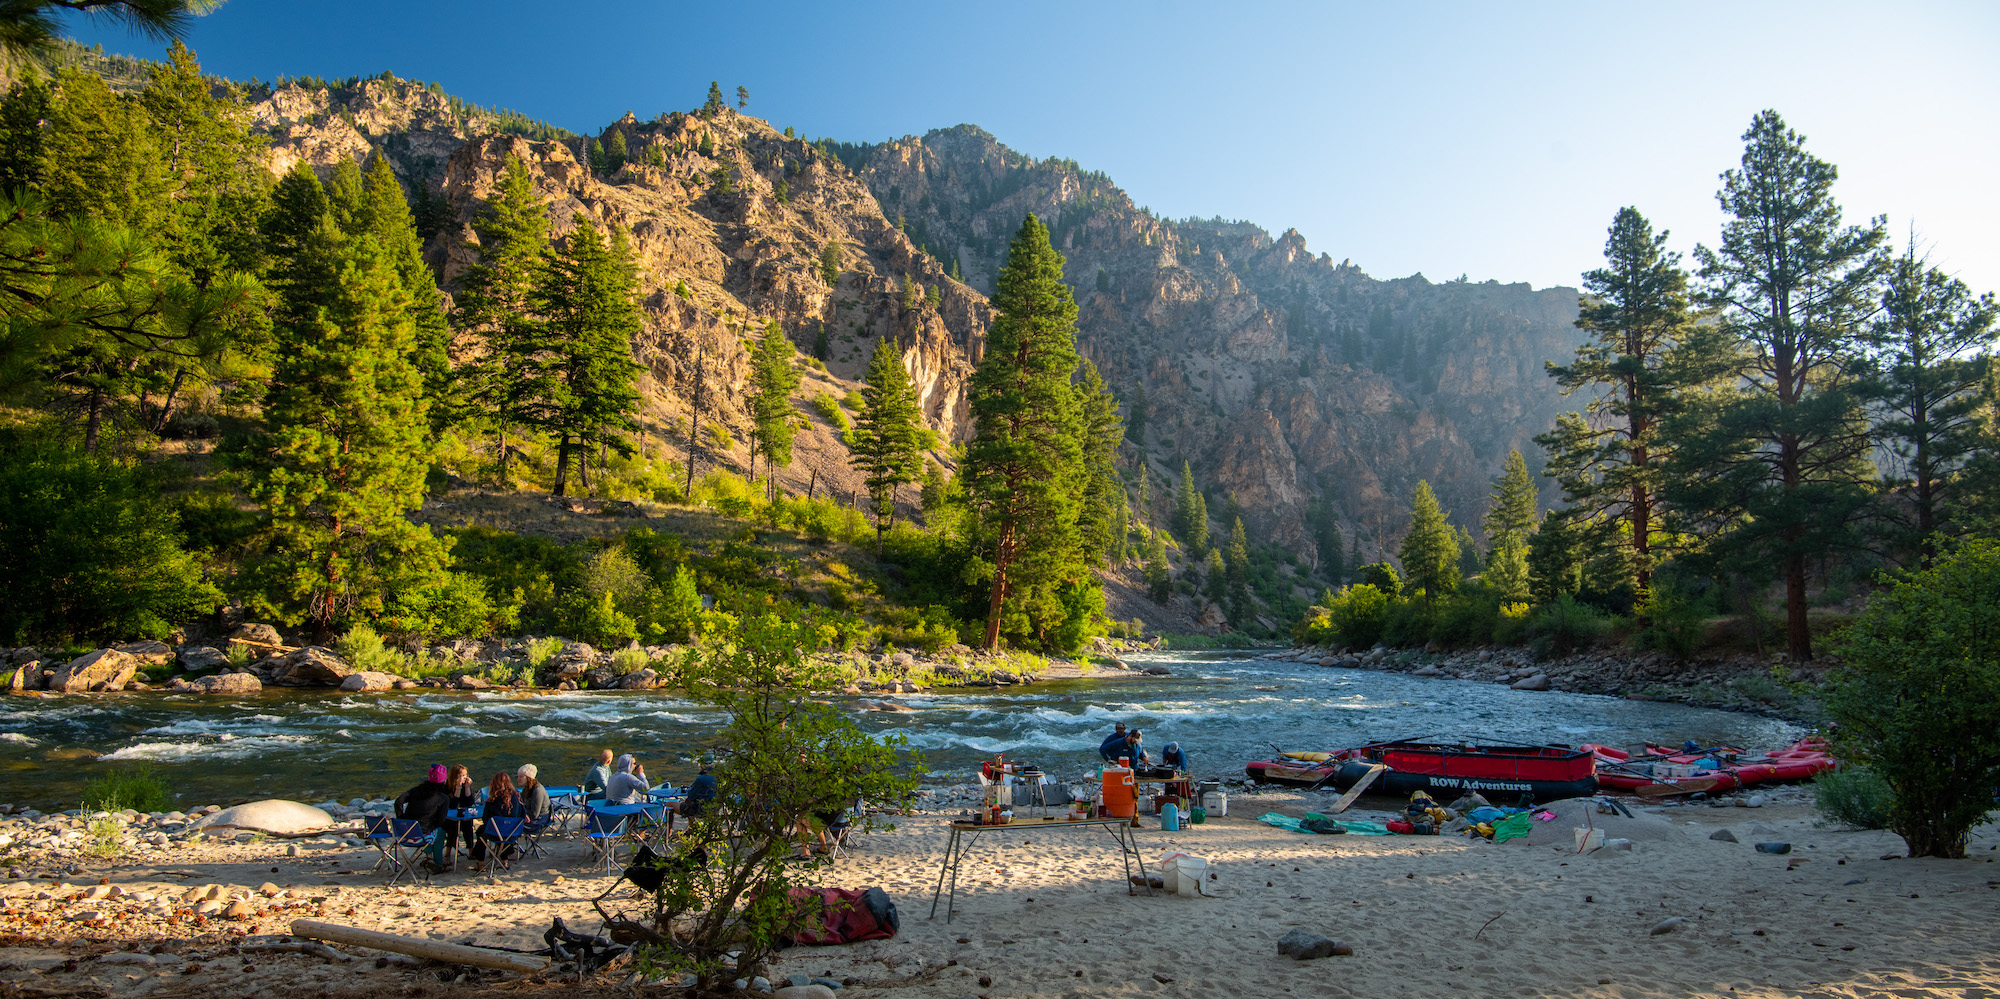 Campsite along the Middle Fork Salmon River full of people and gear sprawled out